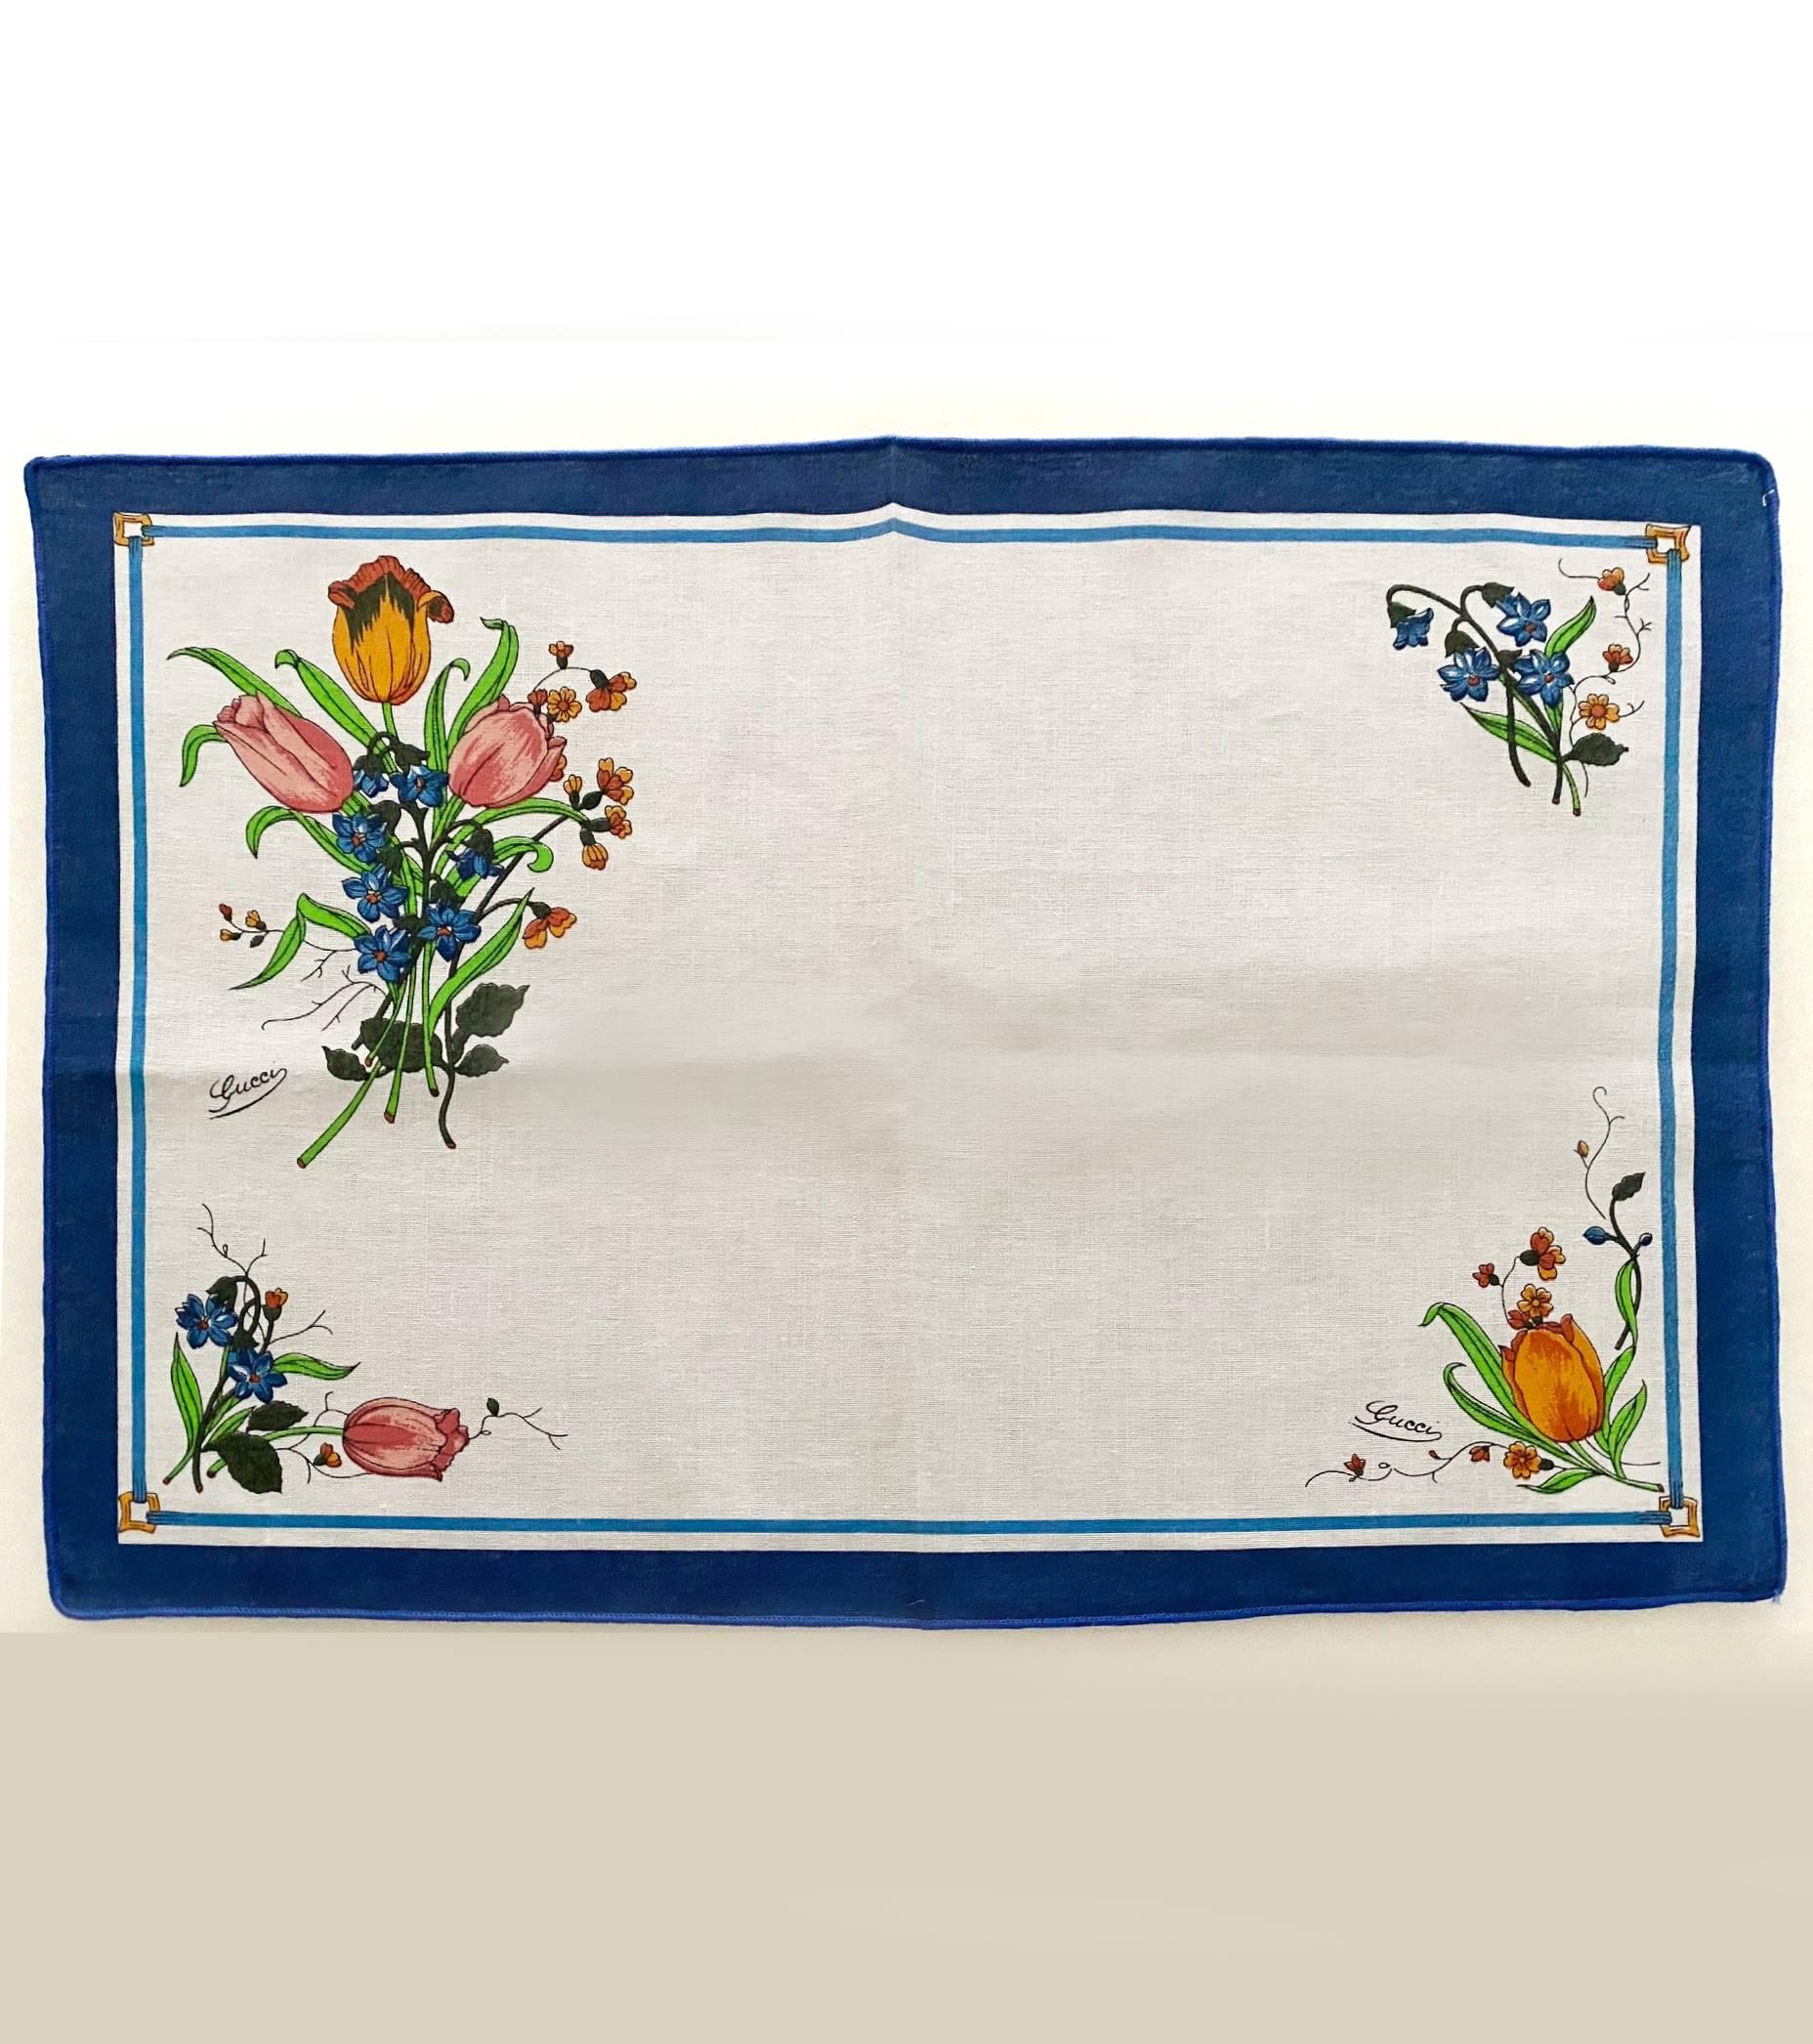 Rare Gucci Accornero print linen placemat set of 2, blue outline, the set comes with 2 matching napkins, Made in Italy 

Condition: vintage 1980s, excellent, no visible marks 

Dimensions: 
- placemat: 52x36cm / 20.4x14.1 in
- napkin: 50x34cm /